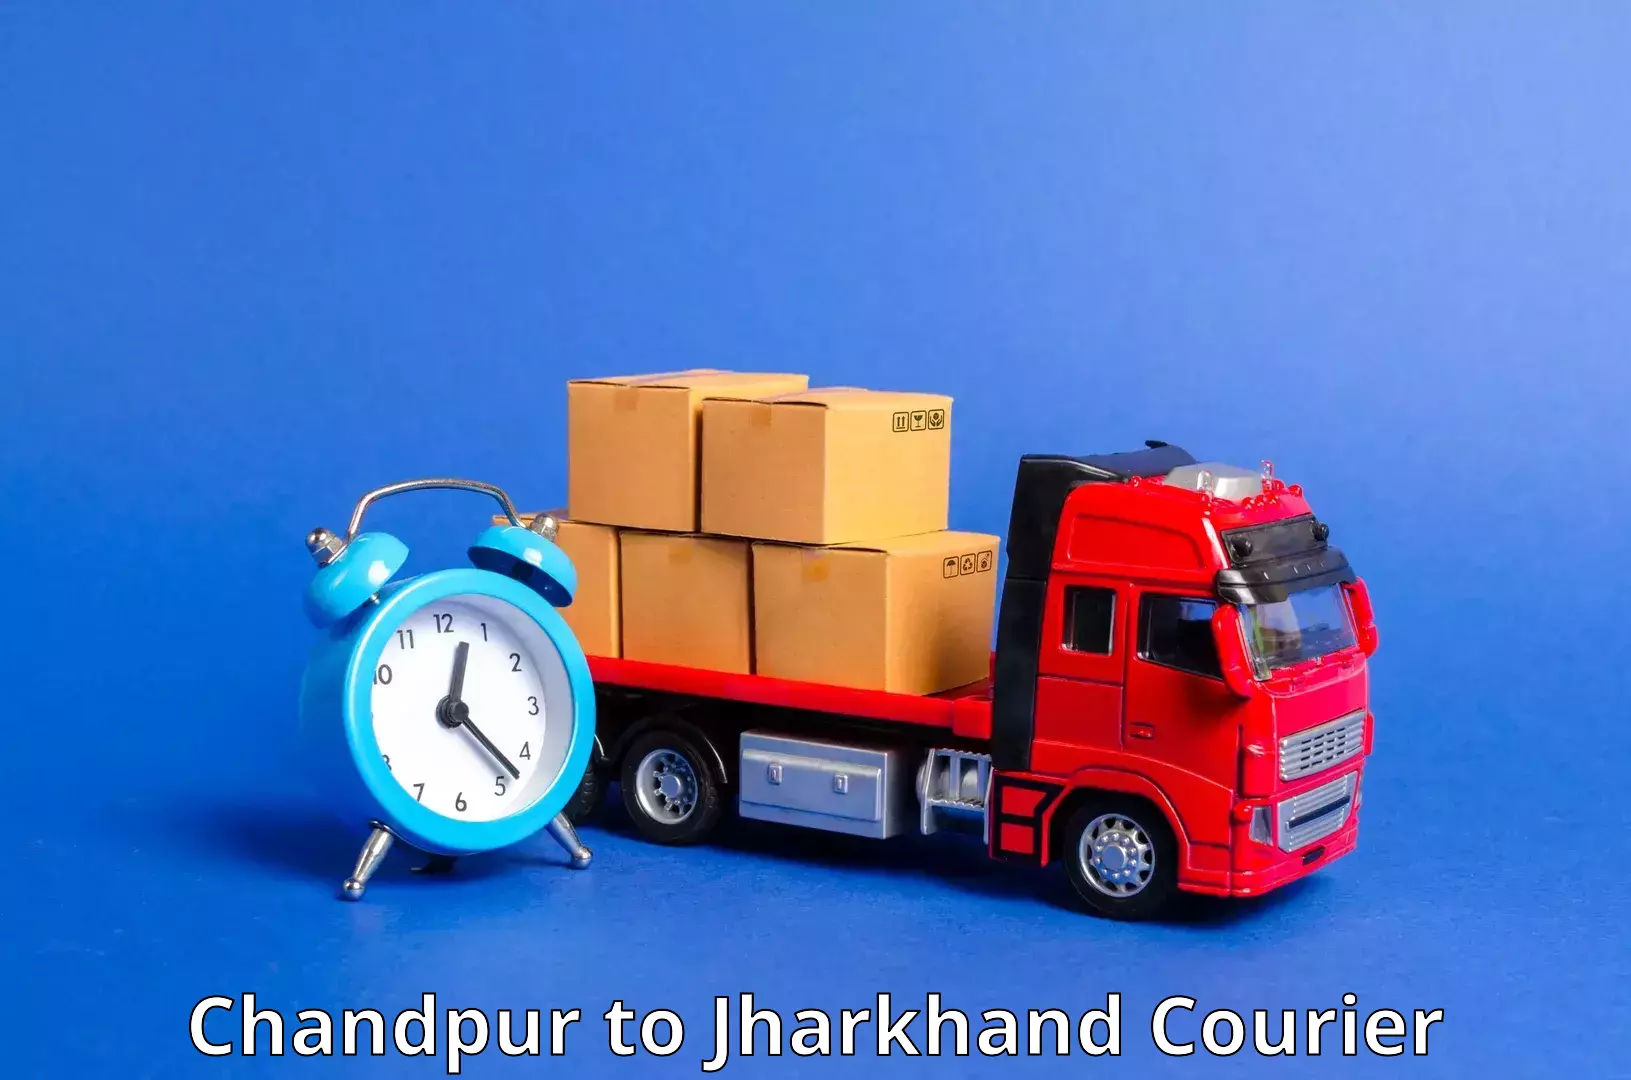 Overnight delivery services in Chandpur to Dhalbhumgarh